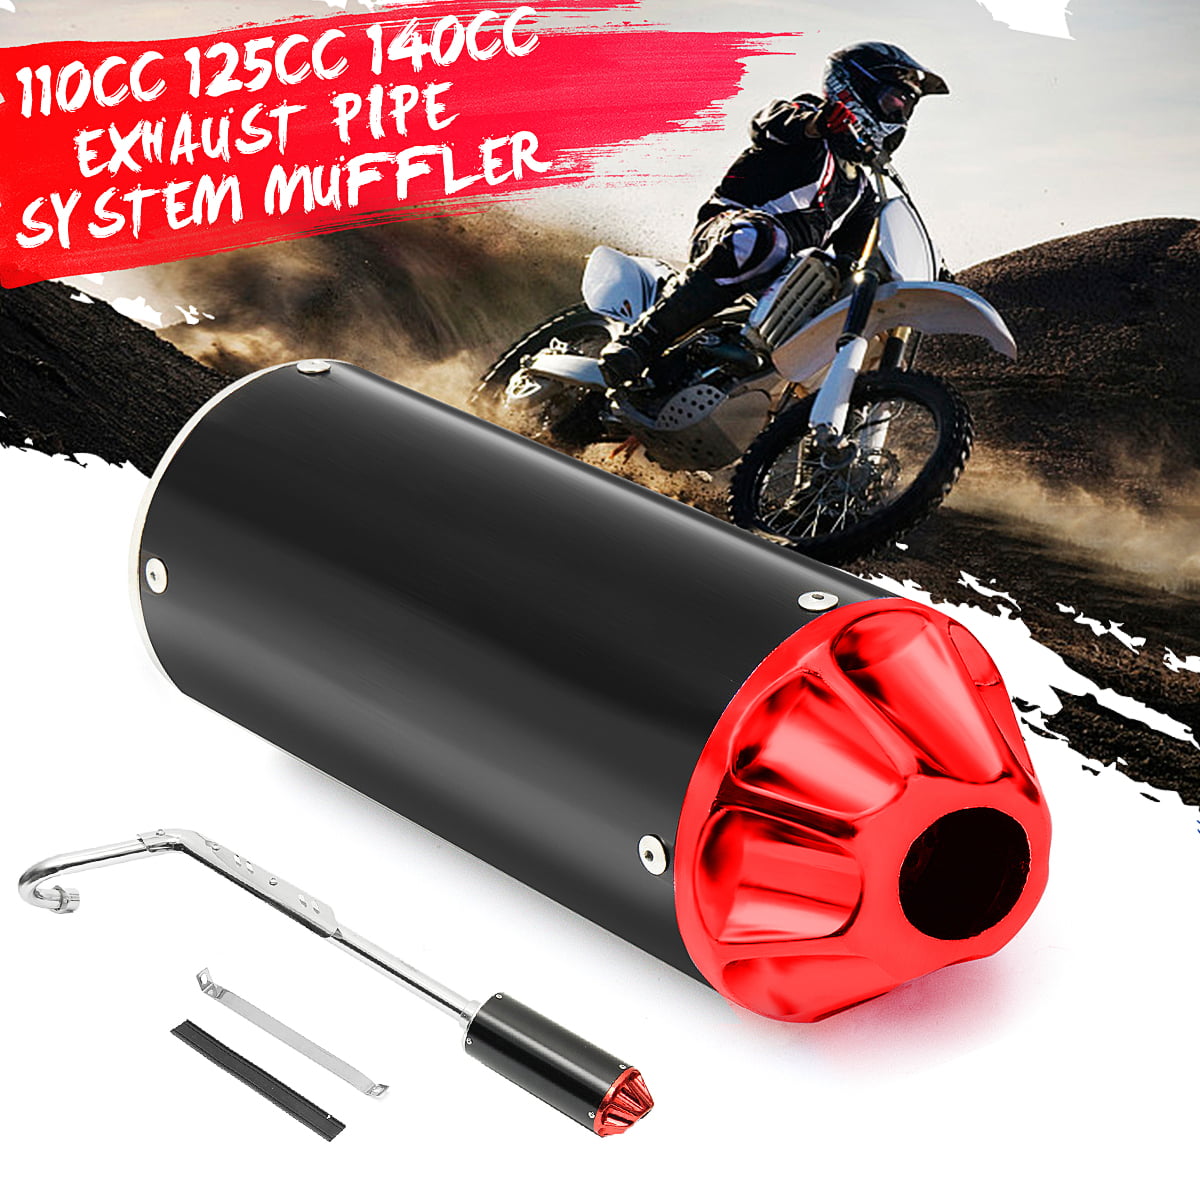 110cc 125cc 140cc Motorcycle Exhaust Pipe Muffler System Pit Dirt Bike 